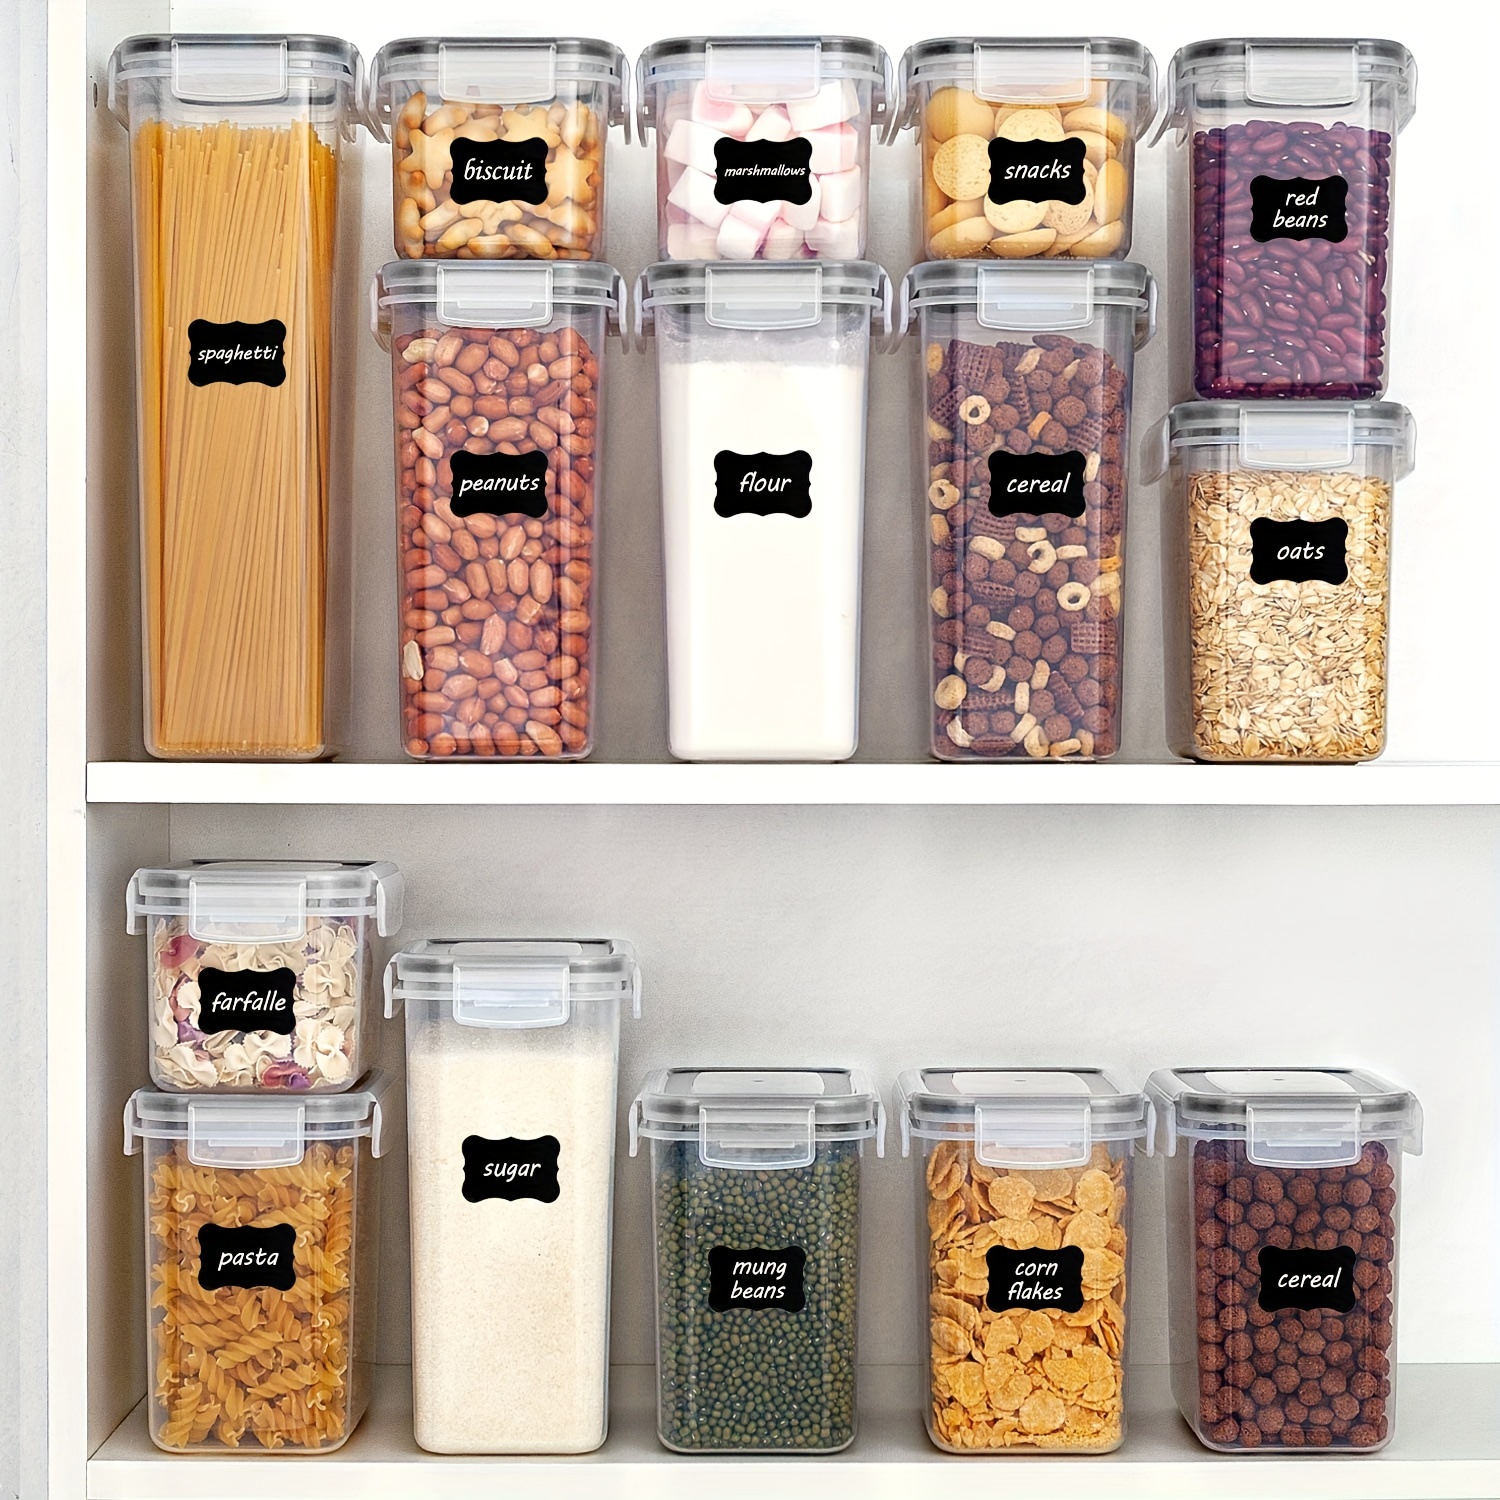 Oavqhlg3b Airtight Food Storage Containers Kitchen Organization with Lids for Pantry Organization,Plastic Kitchen Organization for Cereal,Rice,Pasta